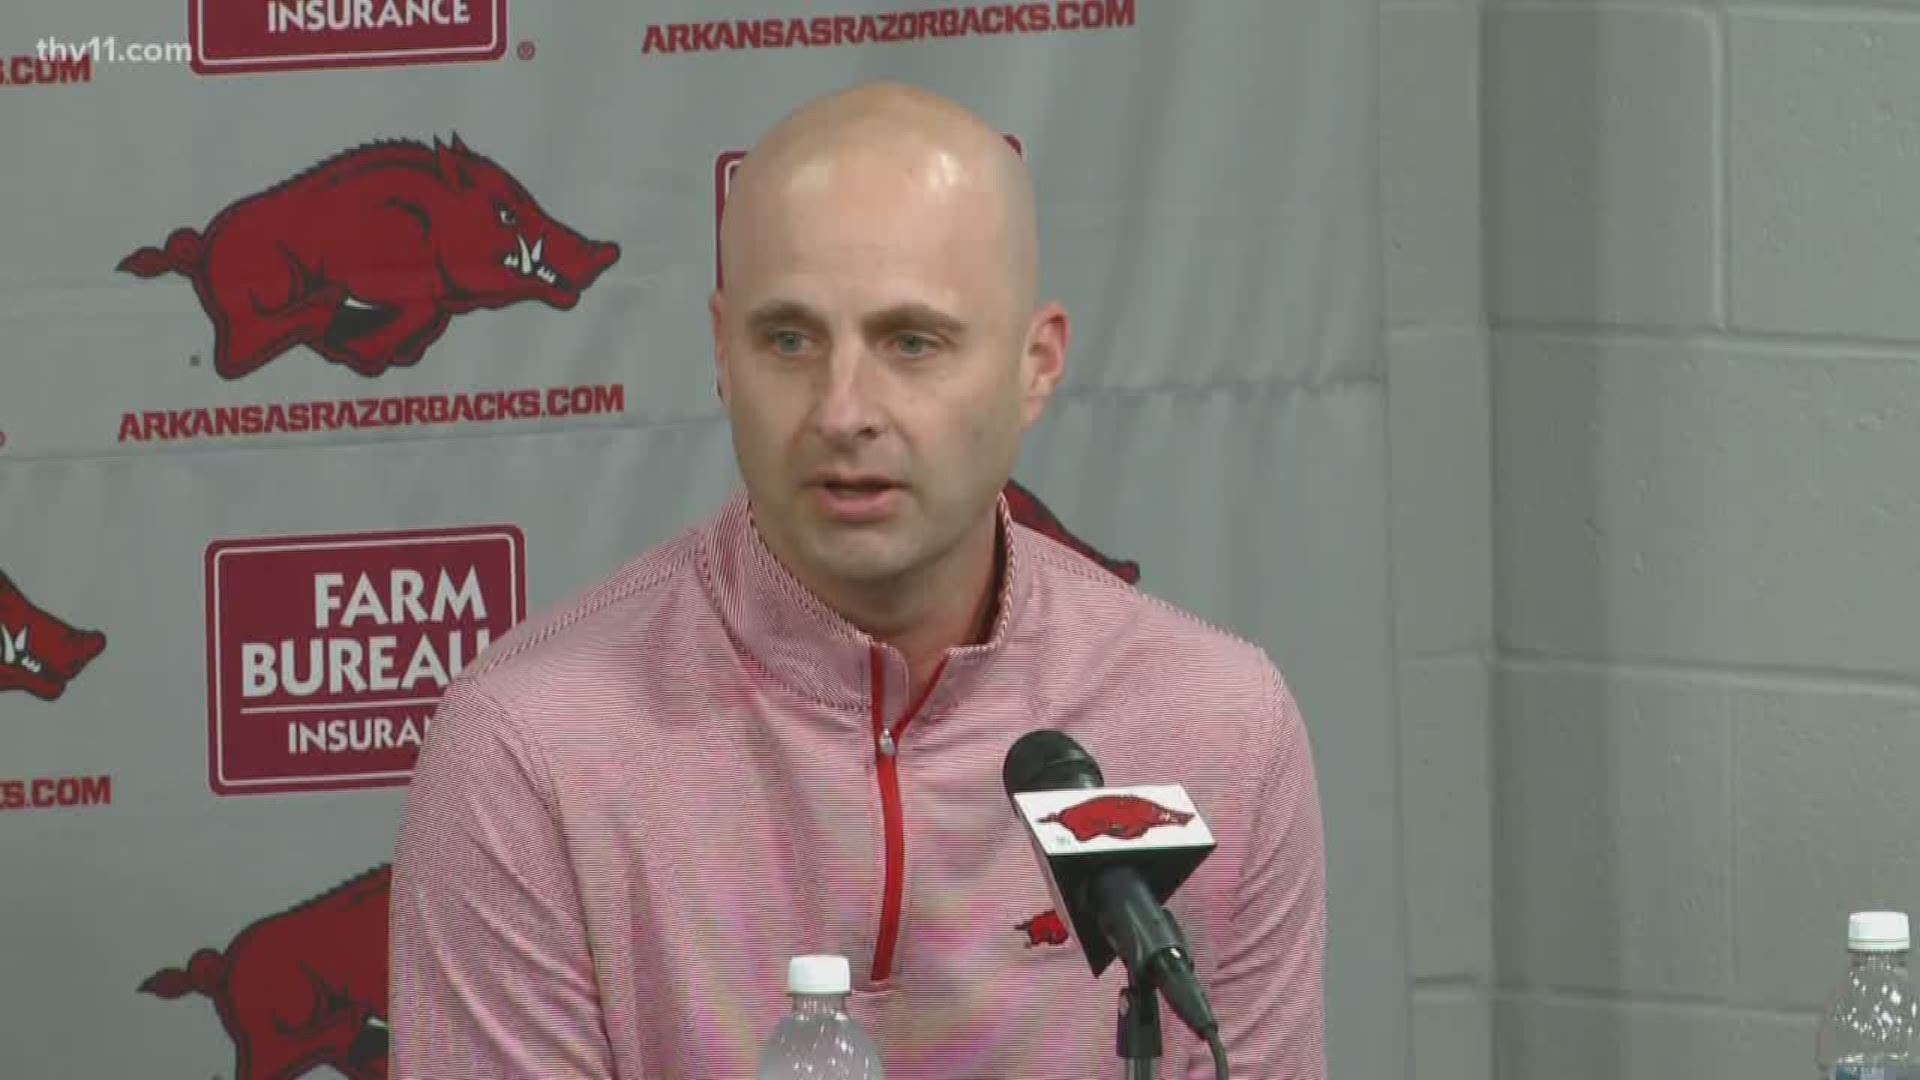 Just 24 hours after the dismissal of Chad Morris, the Razorbacks search for a new head coach. The first step began with Yuracheck and interim head coach Lunney.